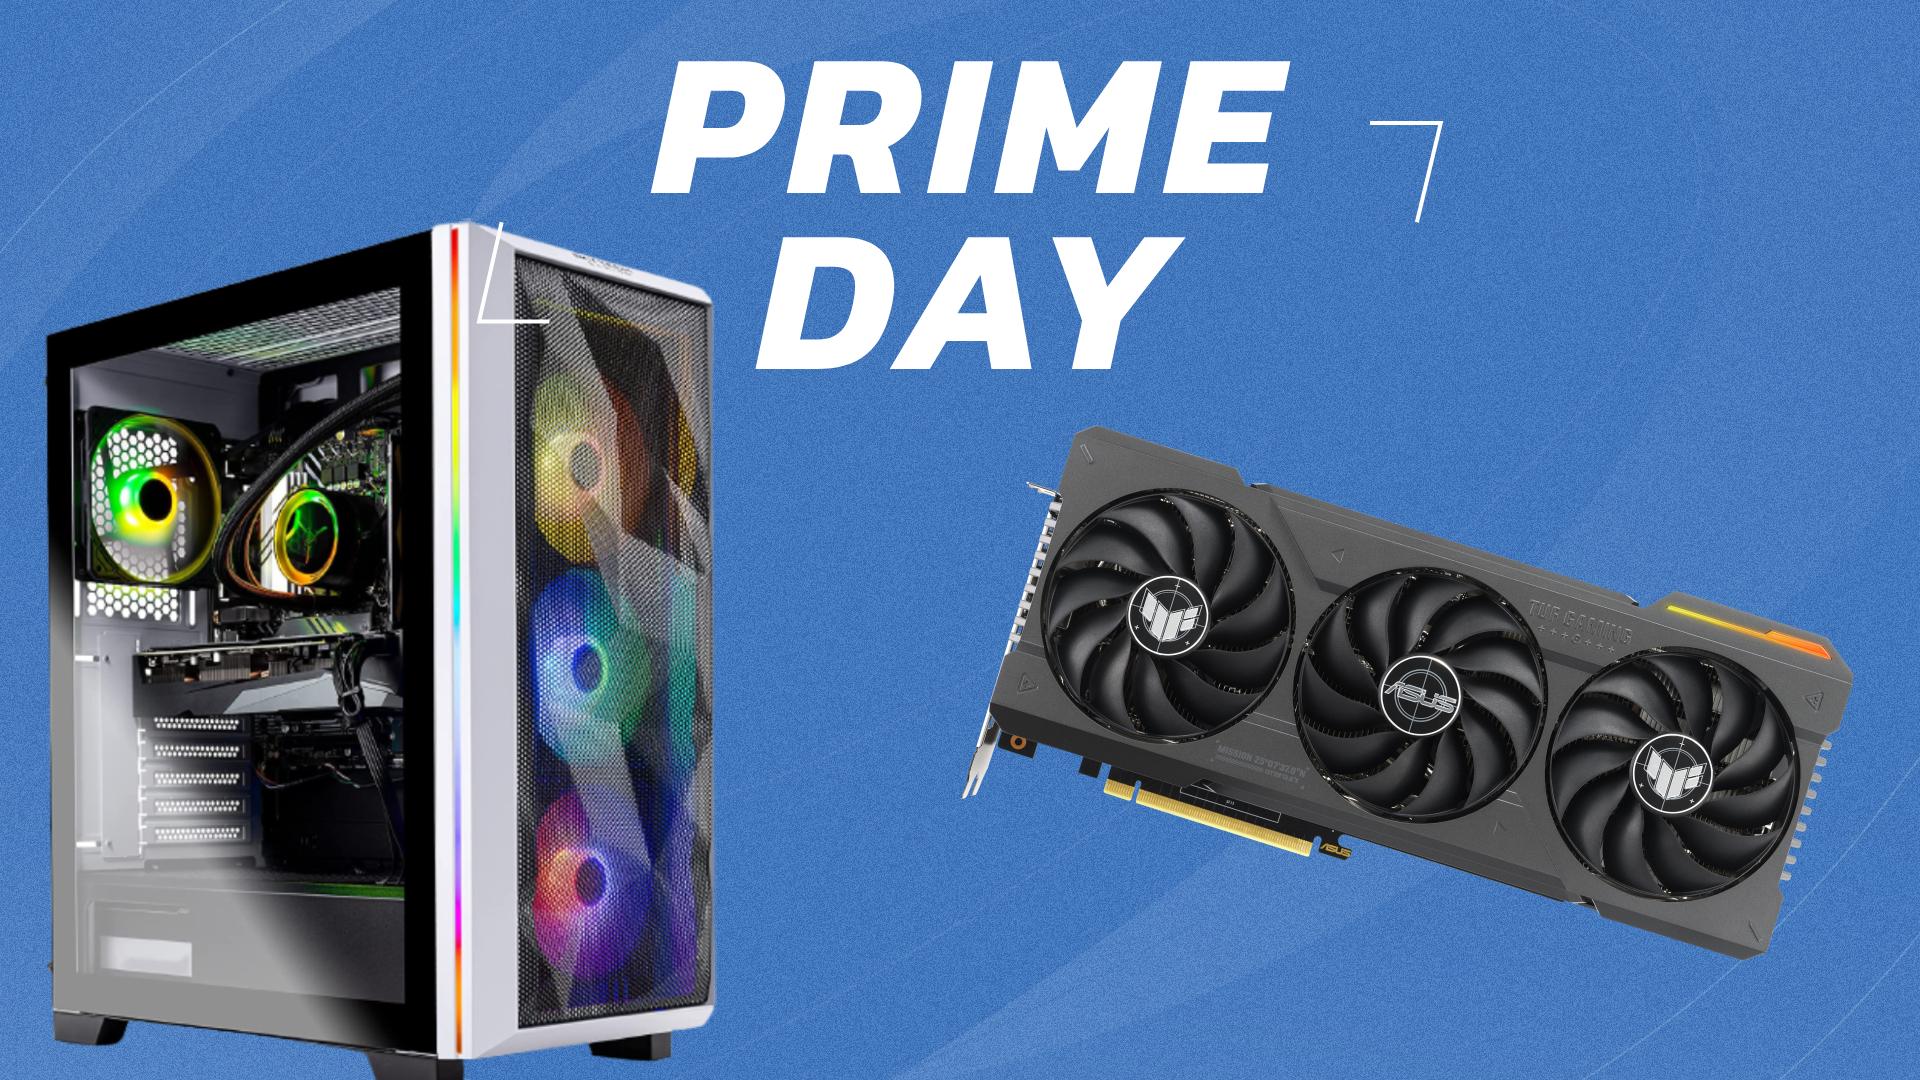 Gaming PC and GPU featured on Blue Background with Prime Day lettering